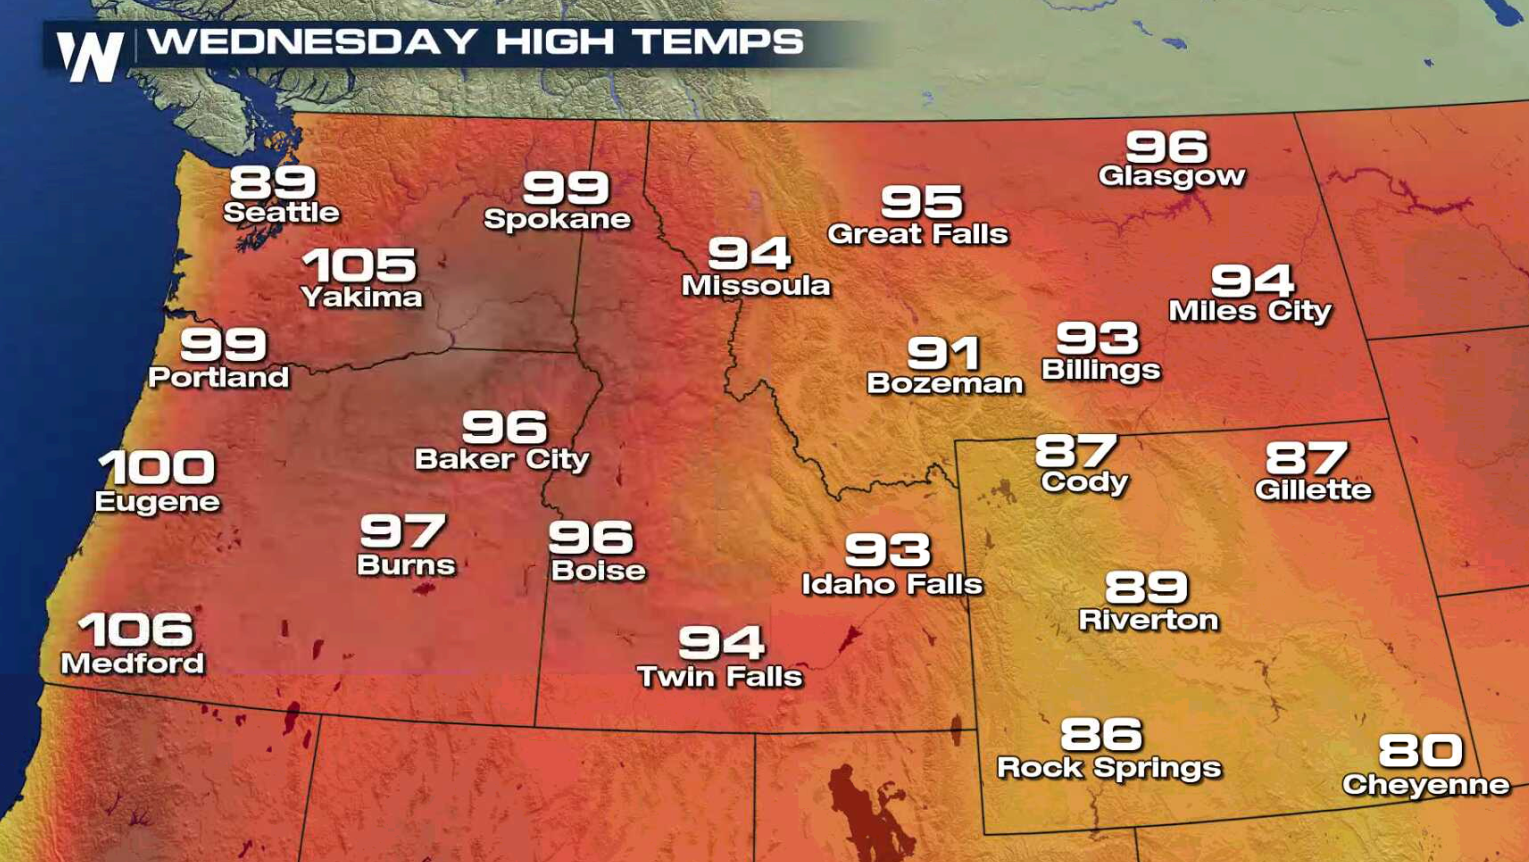 Excessive Heat Returns to the West